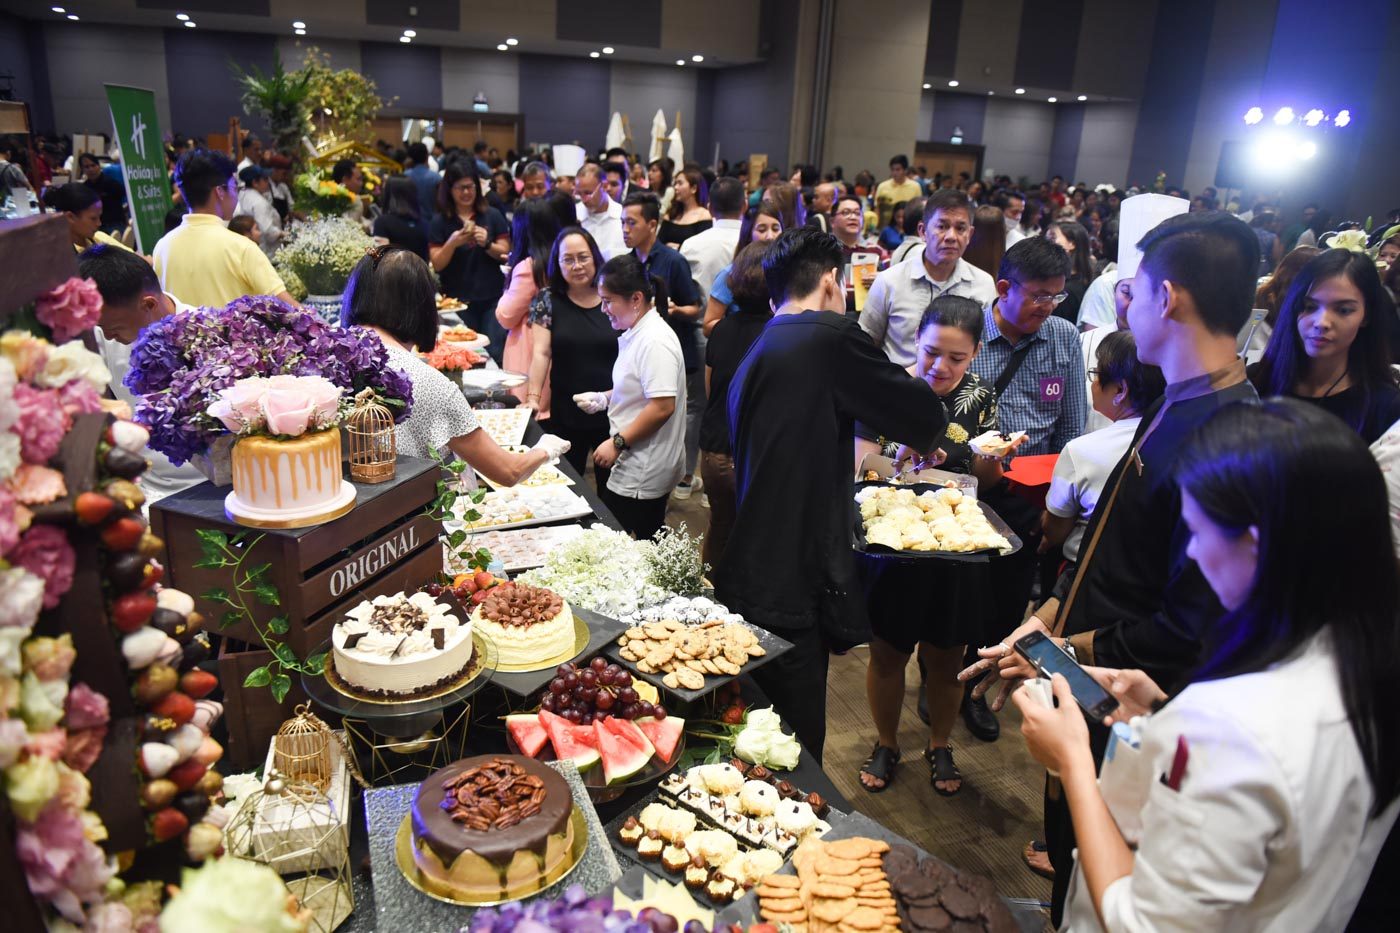 IN PHOTOS: ‘Best Desserts 4’ launches with all-you-can-eat free dessert